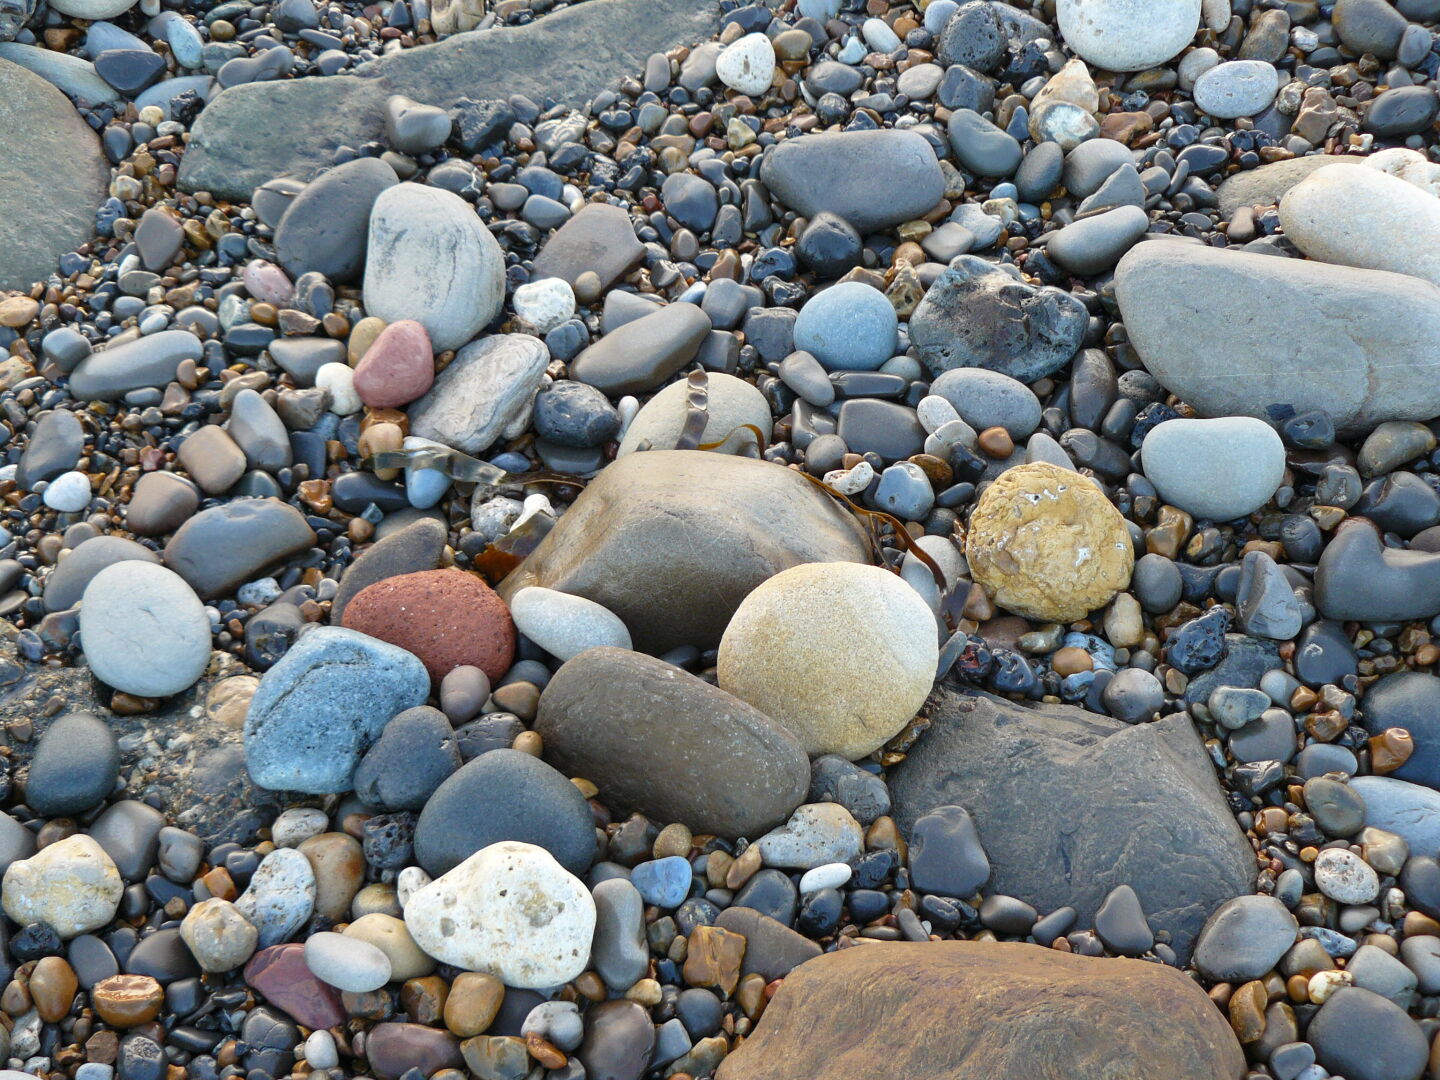 and more colourful pebbles